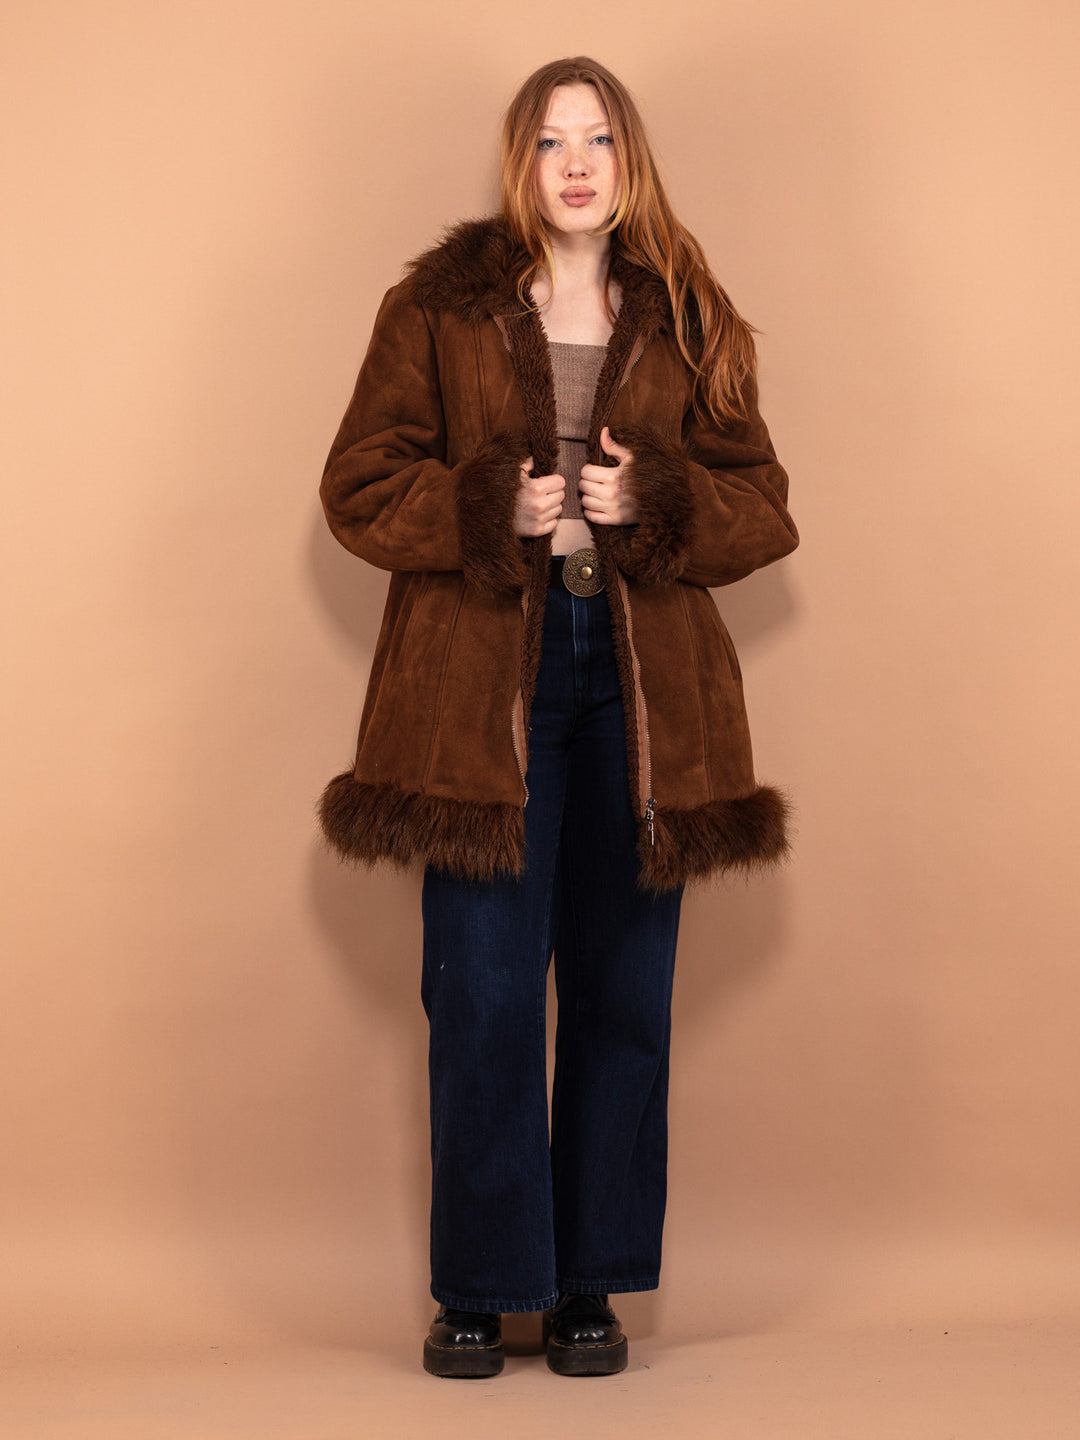 Faux Penny Lane Coat 90s, Size XL, Brown Faux Shearling Coat, Sherpa Trim Afghan Coat,  Cruelty Free Coat, Sustainable Vintage Clothing